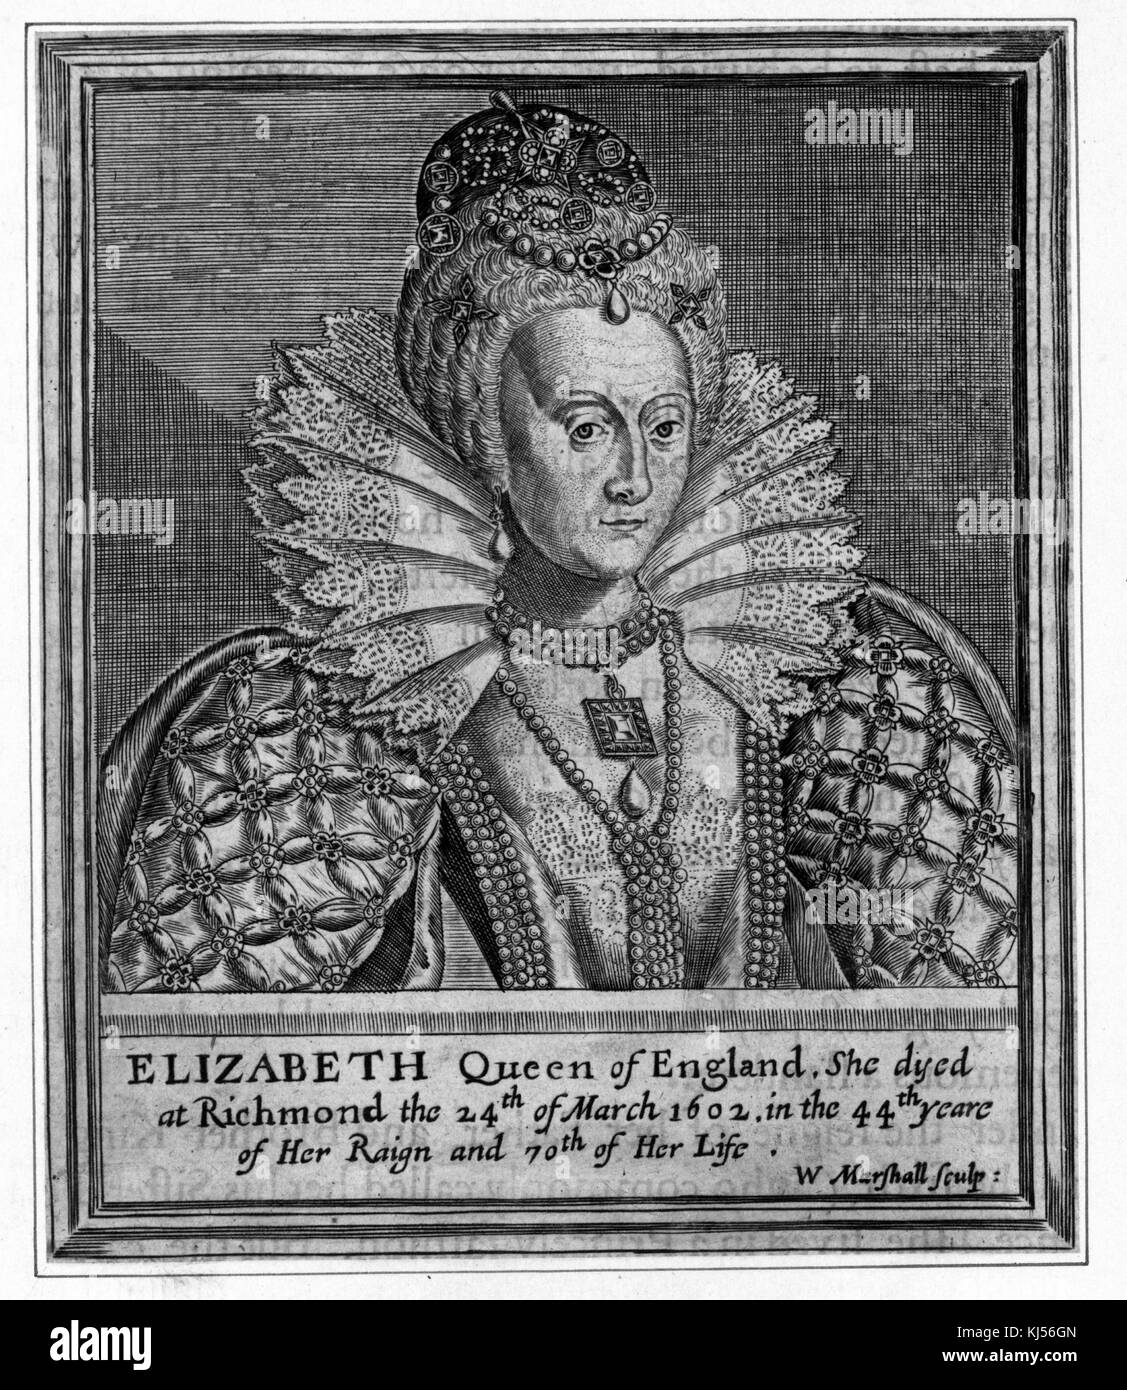 Engraved portrait of Elizabeth Queen of England, captioned 'Elizabeth Queen of England, she died at Richmond the 24th of March 1602, in the 44th year of her reign and 70th of her life', by William Marshall, 1880. From the New York Public Library. Stock Photo